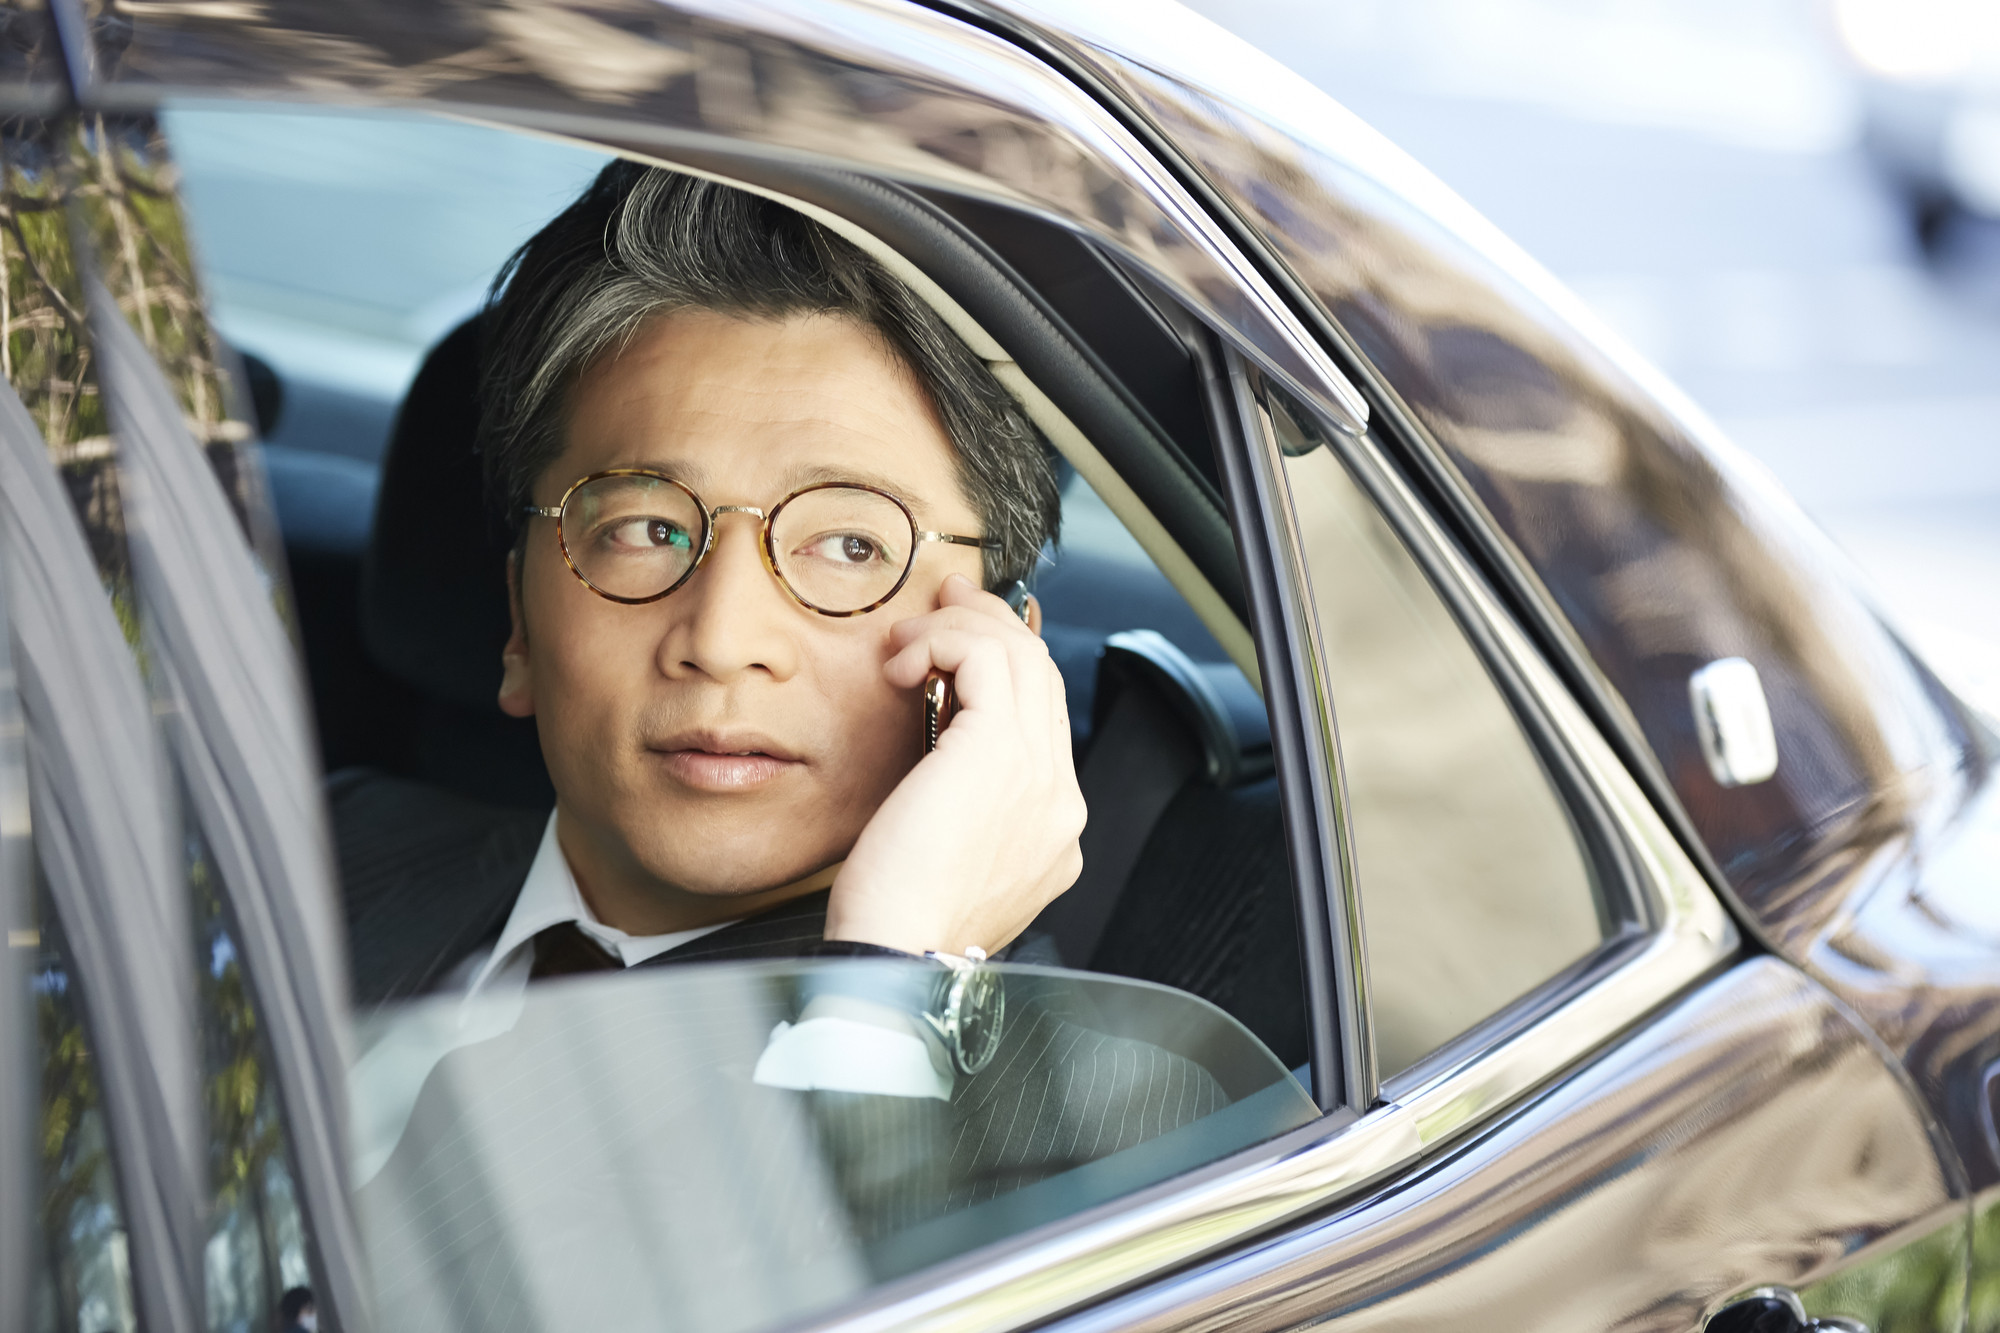 ■I want to introduce an executive driver from outside! What are executive driver working hours?